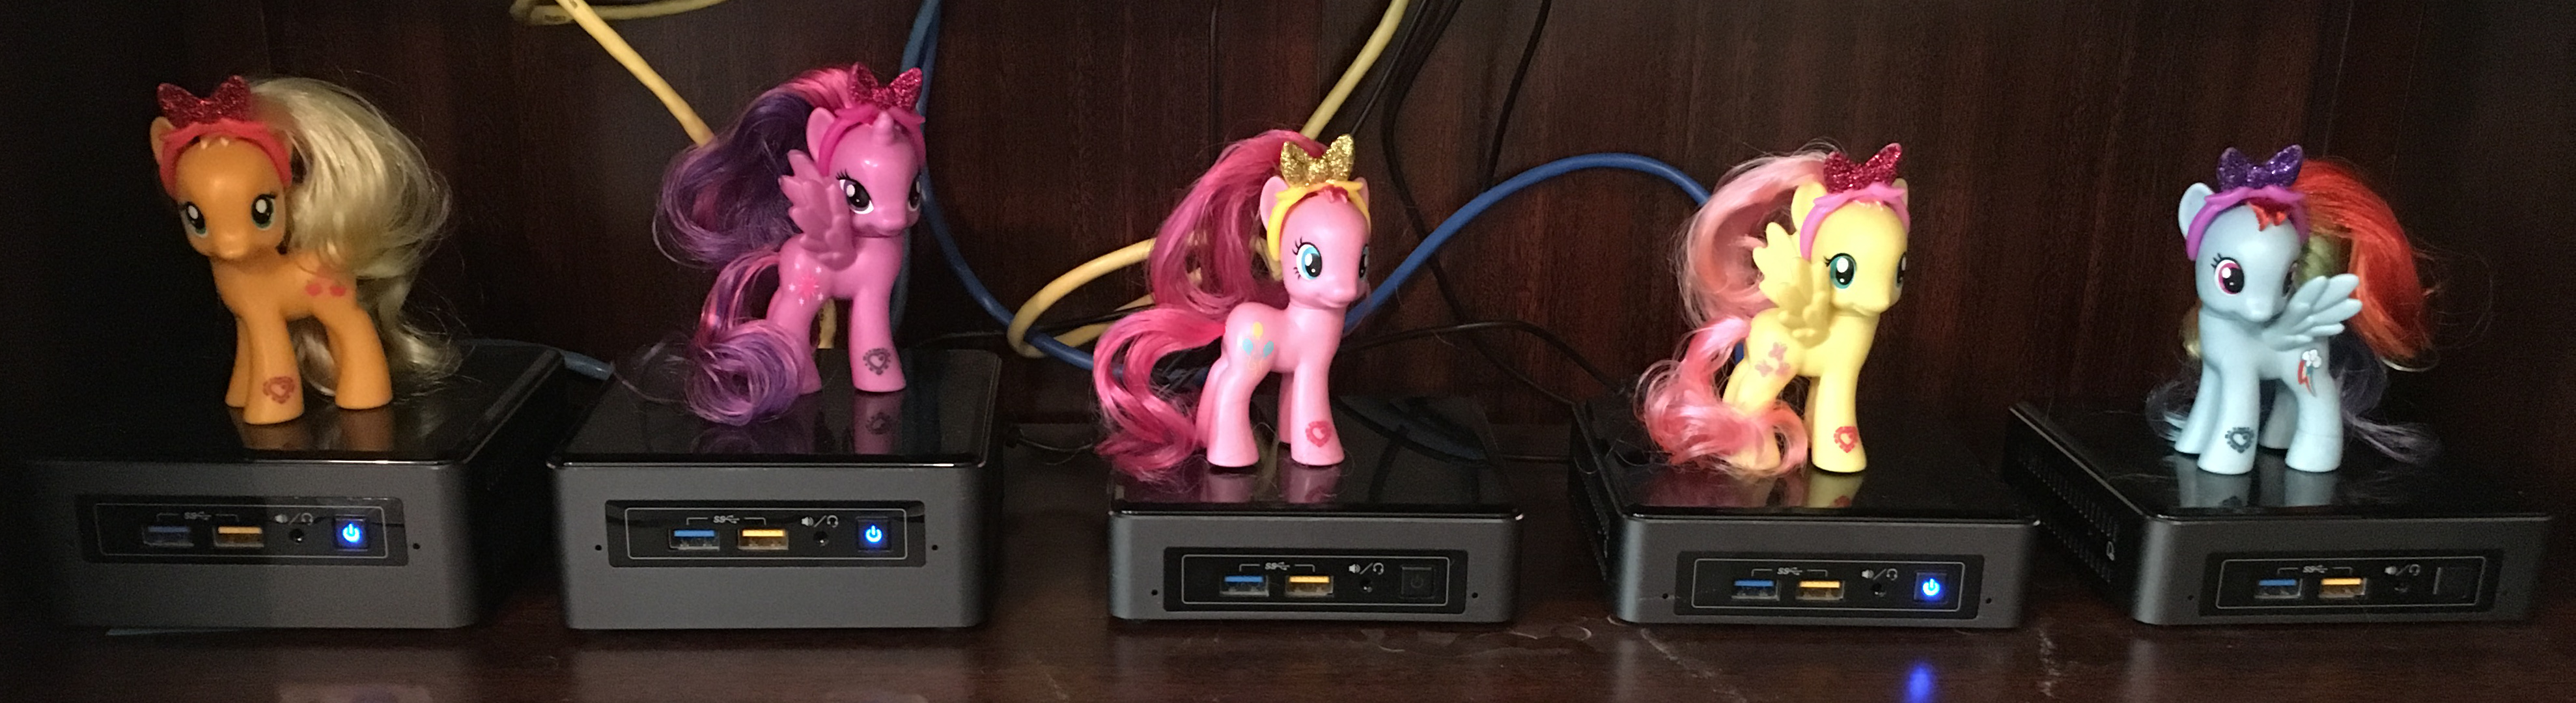 Five computers with My Little Ponies on top of them